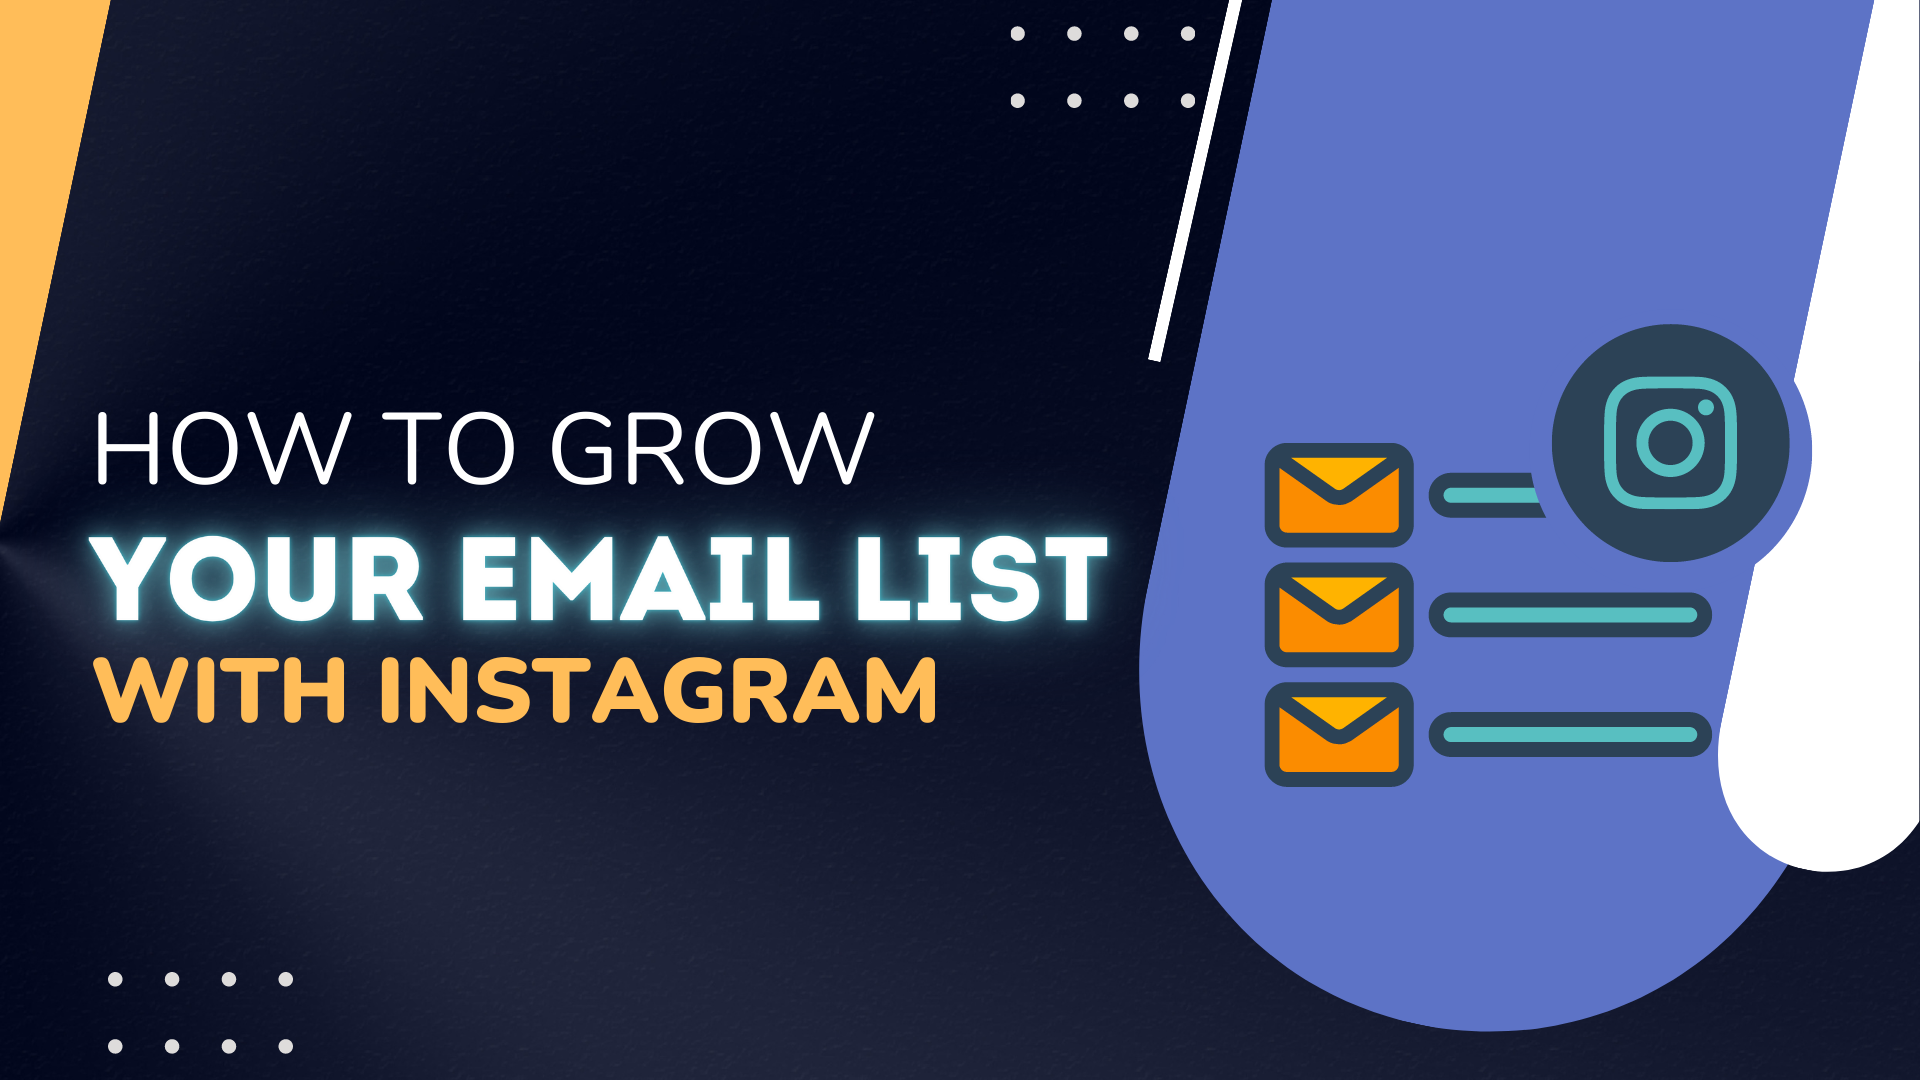 5 Ways To Grow Your Email List With Instagram